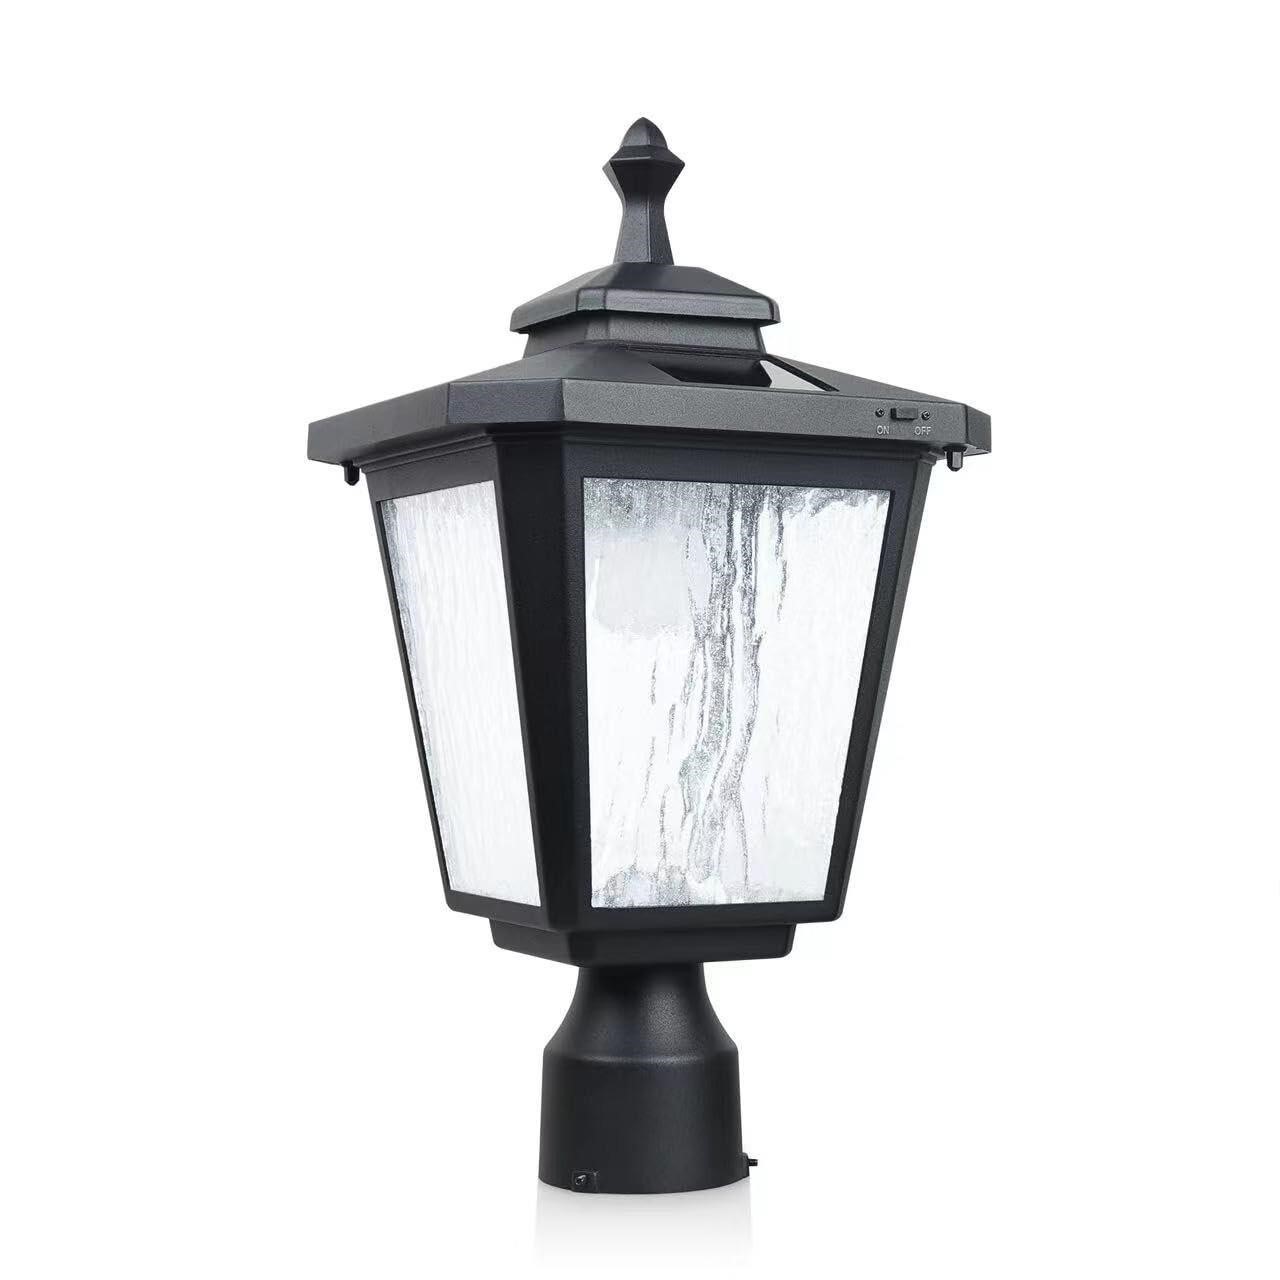 Koepom KP4319Q-A Outdoor Solar Post Lights with G